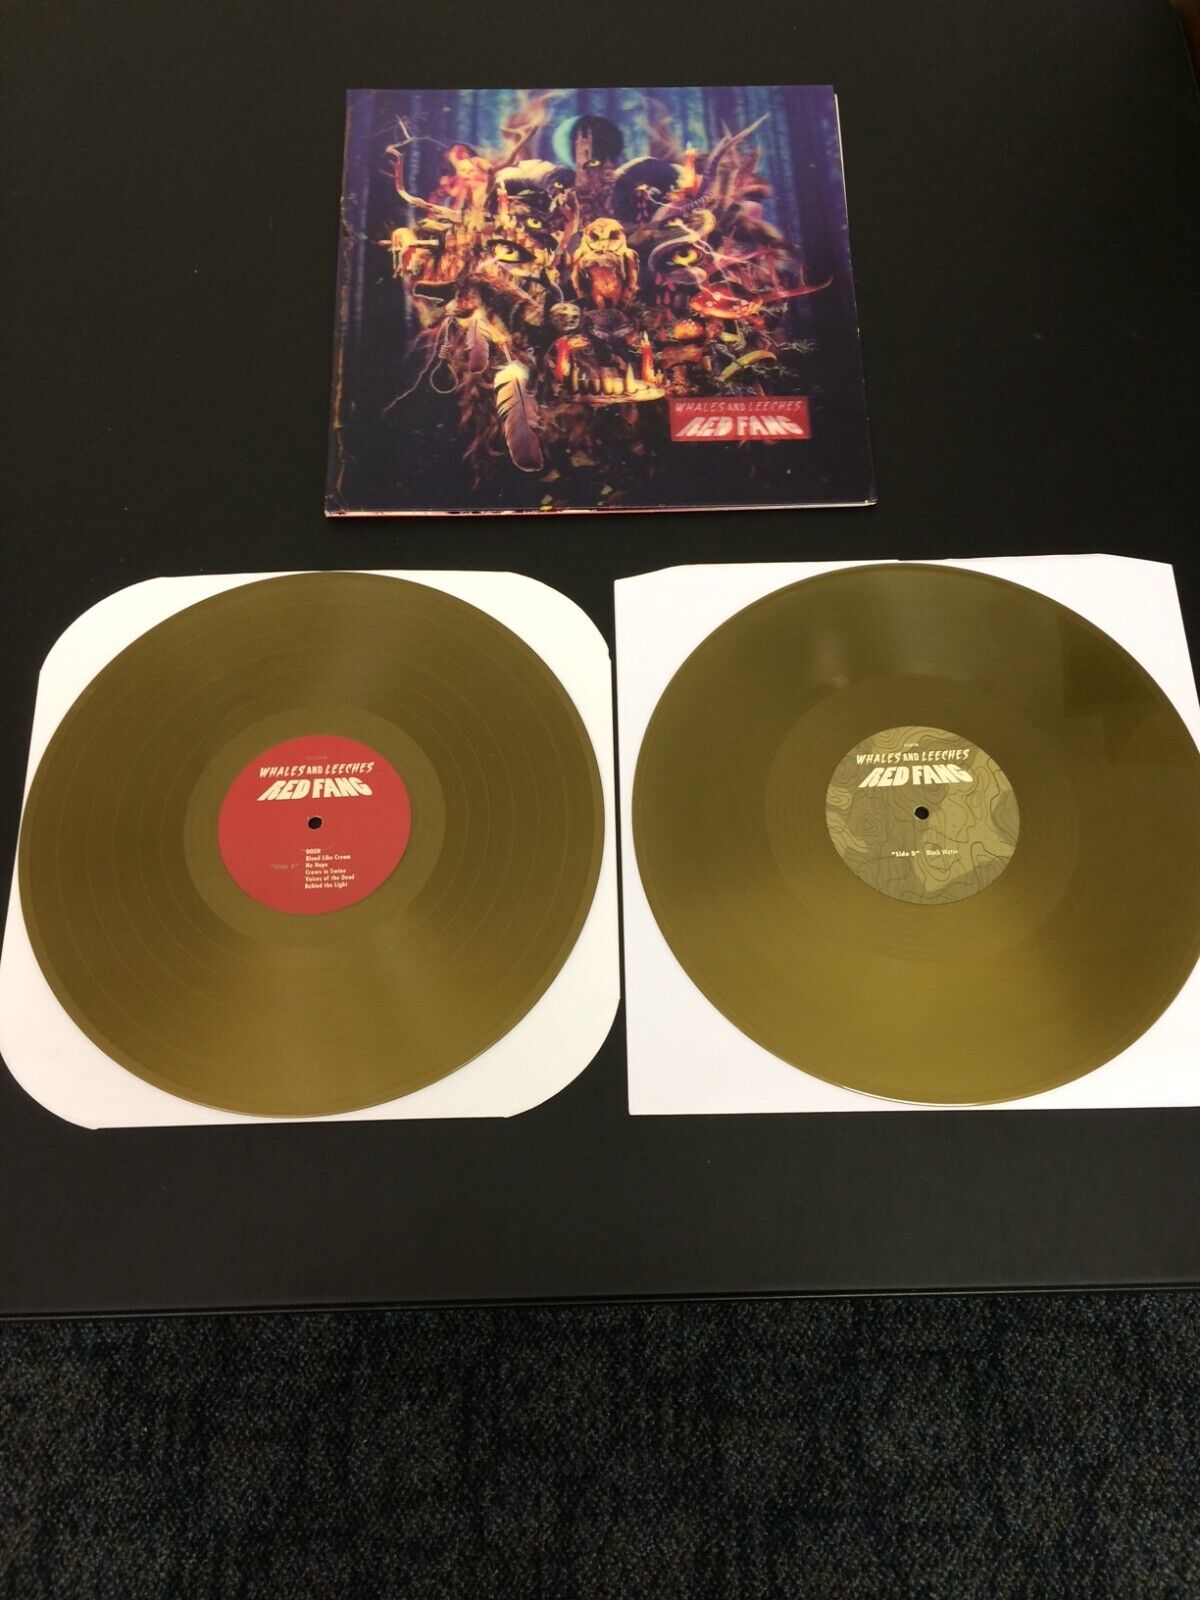 RED FANG WHALES & LEECHES 2XLP GOLD VINYL LIMITED 600 LENTICULAR COVER 1ST PRESS